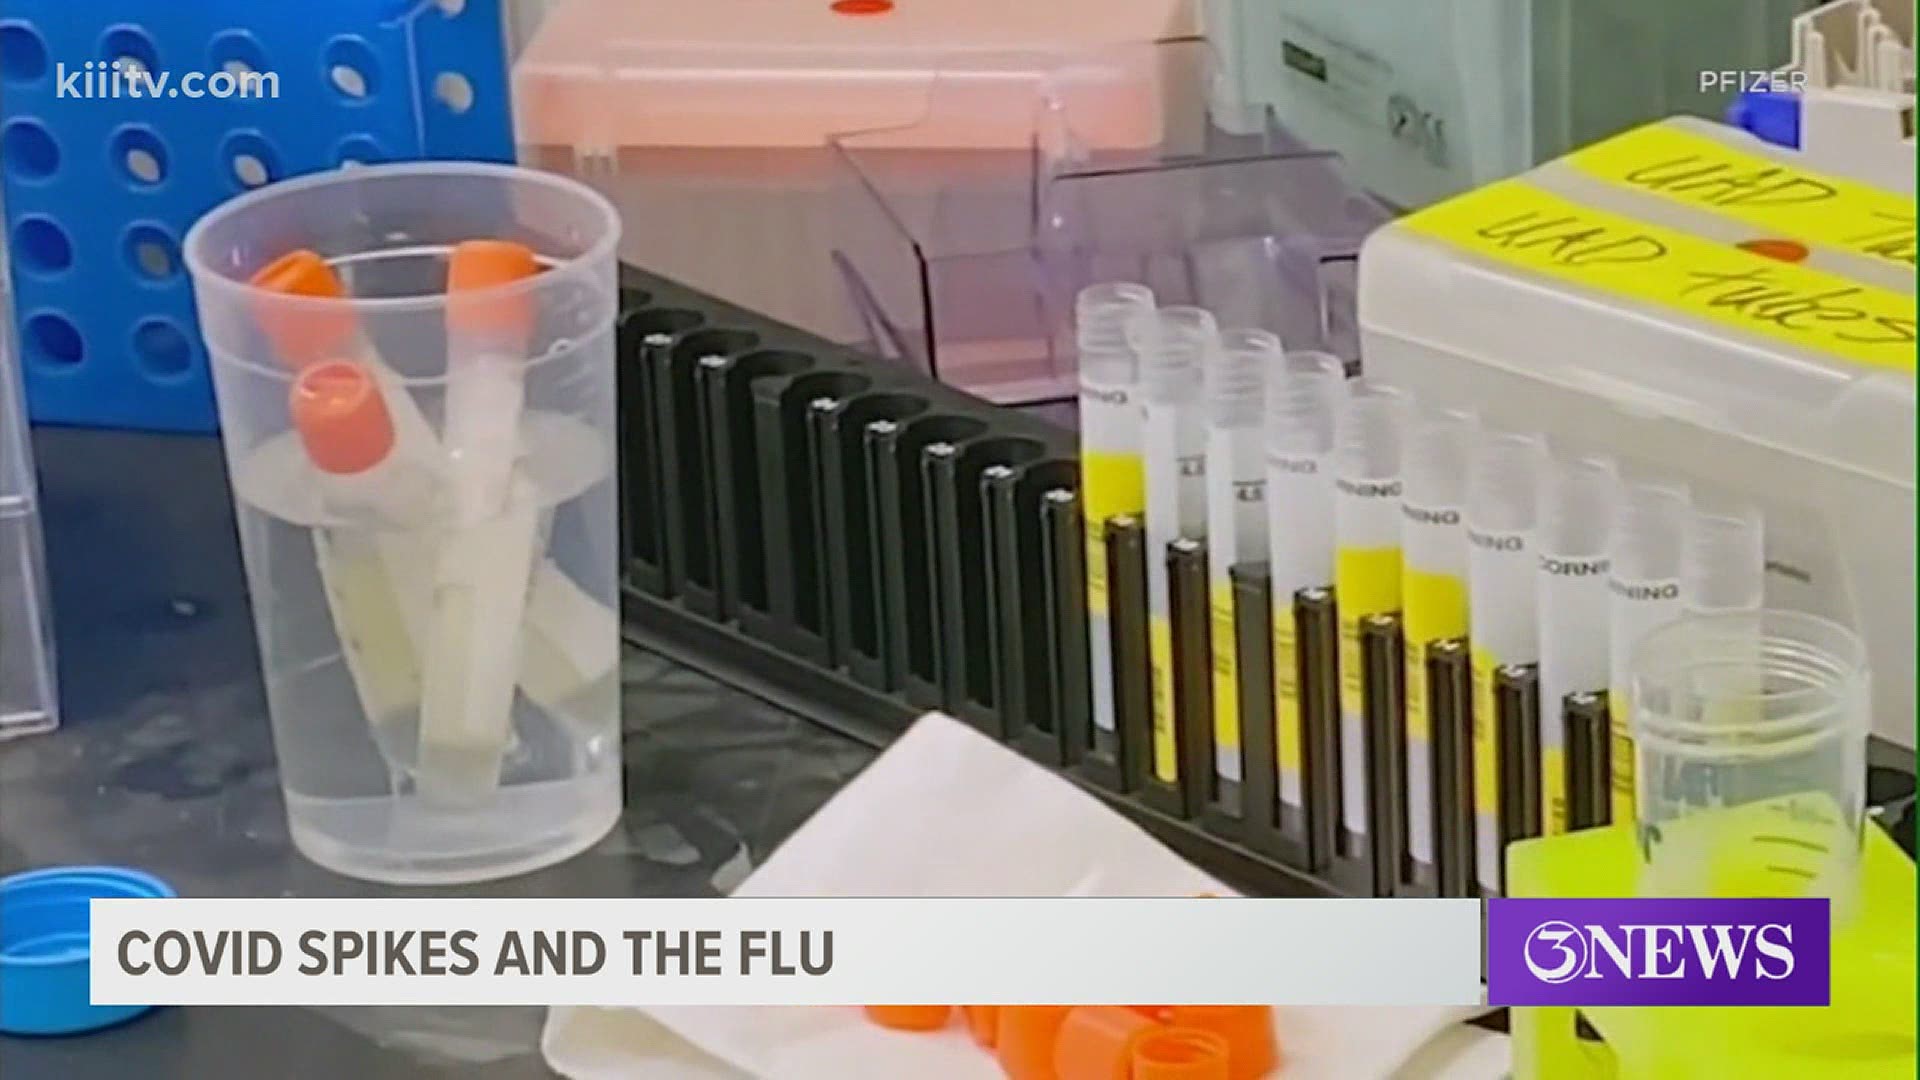 3News spoke with a Coastal Bend doctor to see why flu numbers are low and how we can keep them that way.